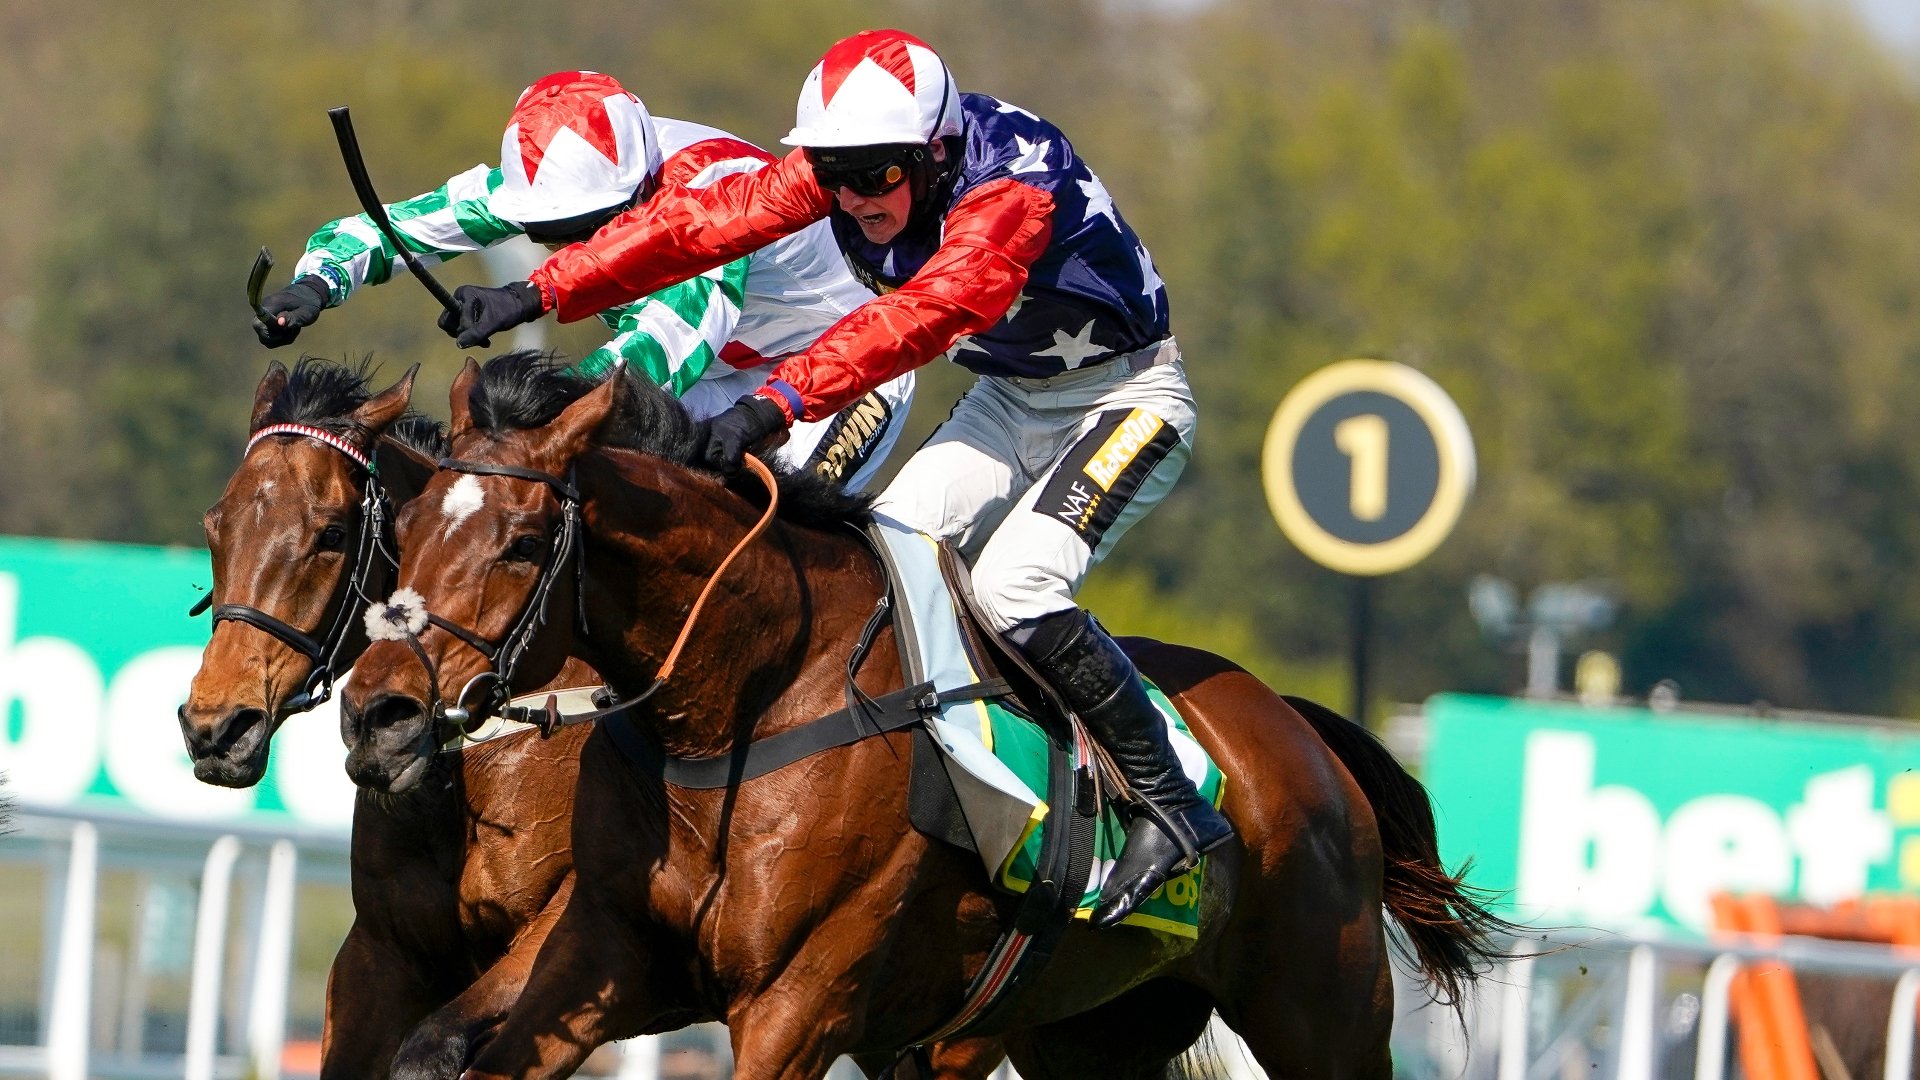 2023 Scottish Grand National Tips - Odds, trends and best bets for Ayr